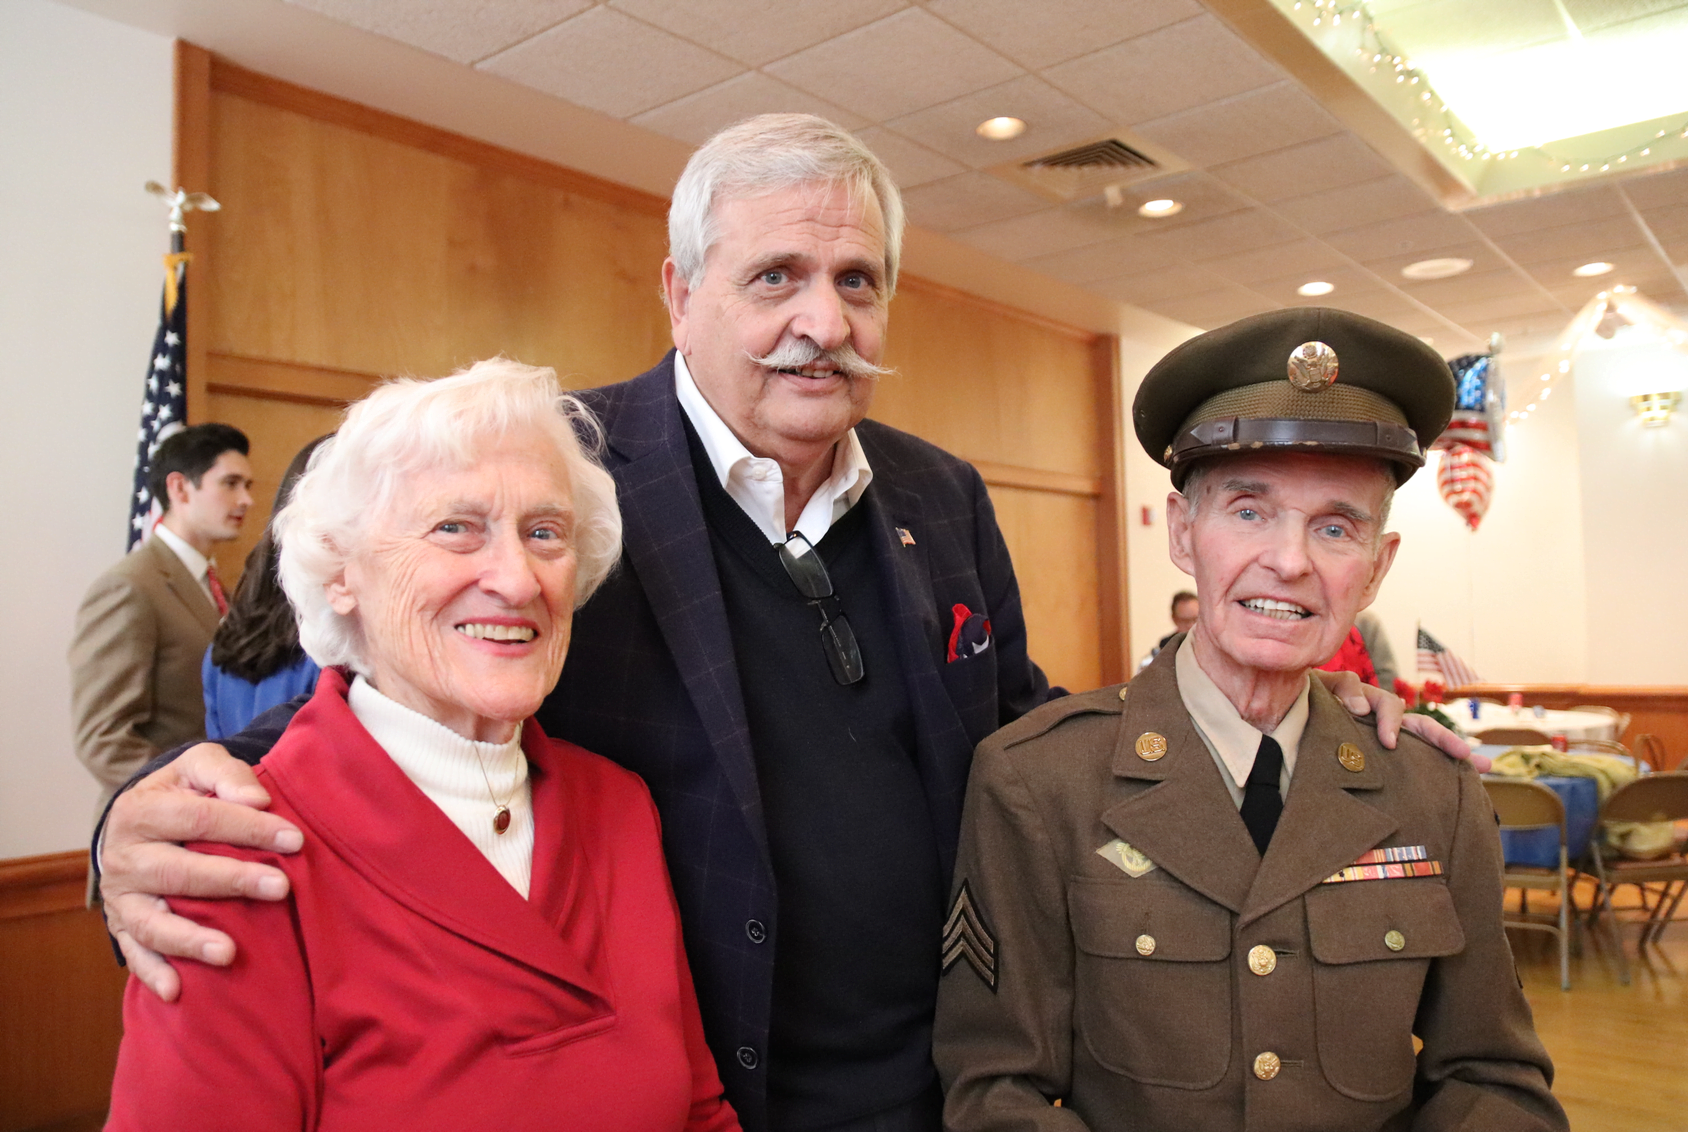 Nancy and George Chelwick with Dave D'Andrea at Redmen's Hall where the USO Show Troupe performed at a luncheon for Veterans Day. Nov 11, 2019 Photo: Leslie Yager